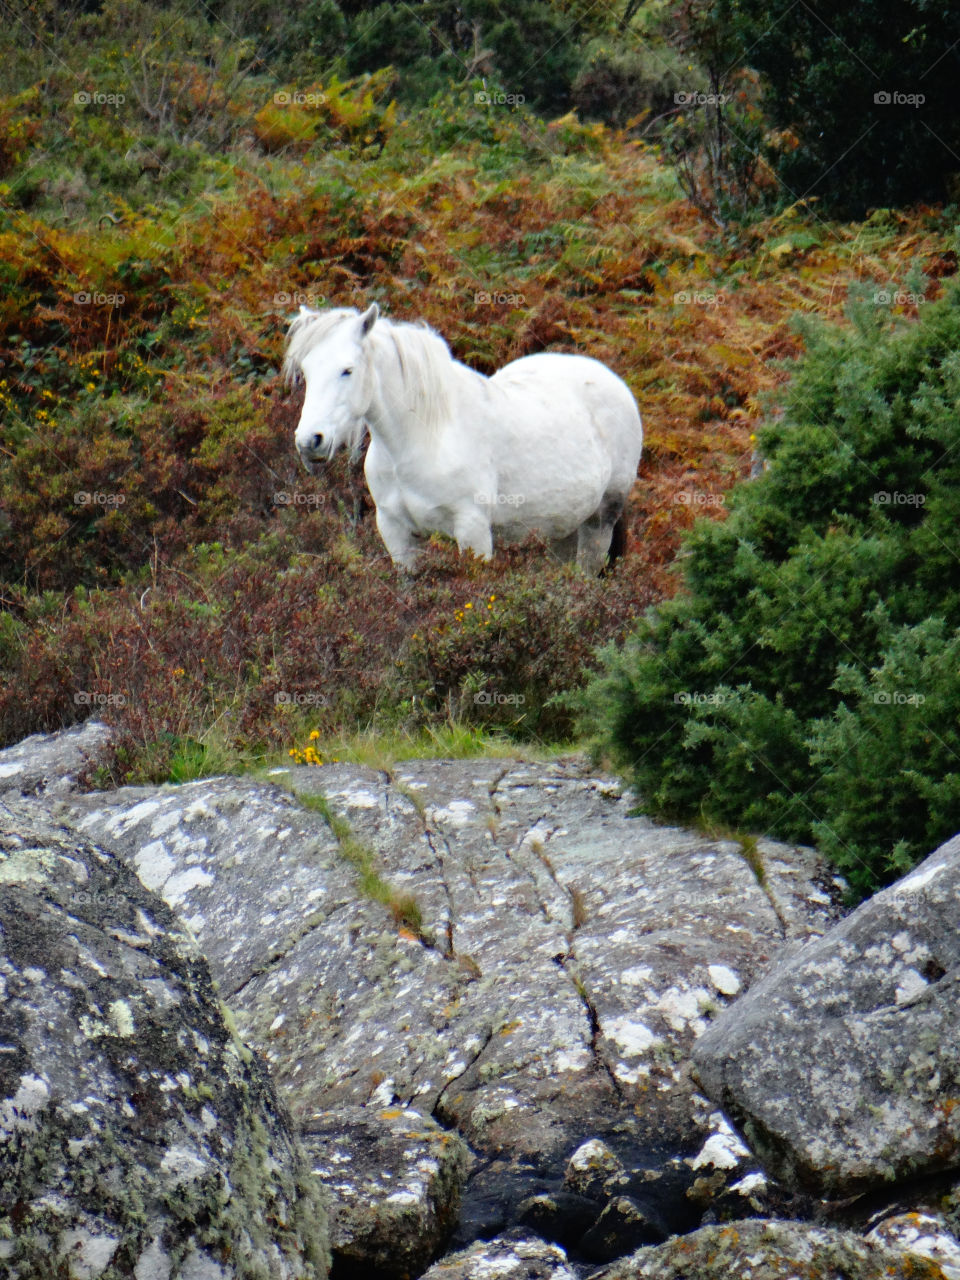 View of white horse in Ireland